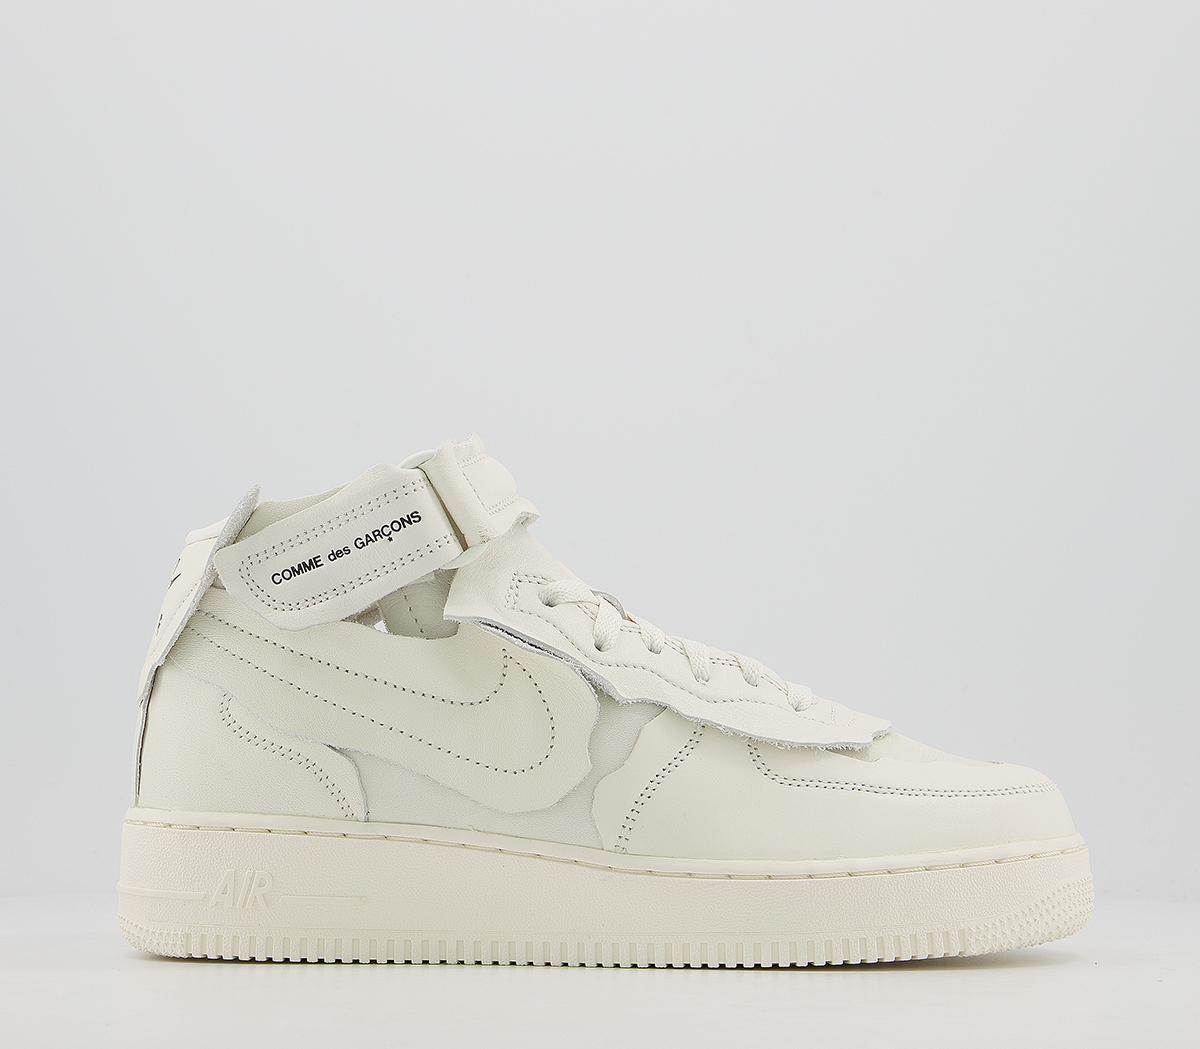 Cdg Nike Cut Off Air Force 1 Trainers